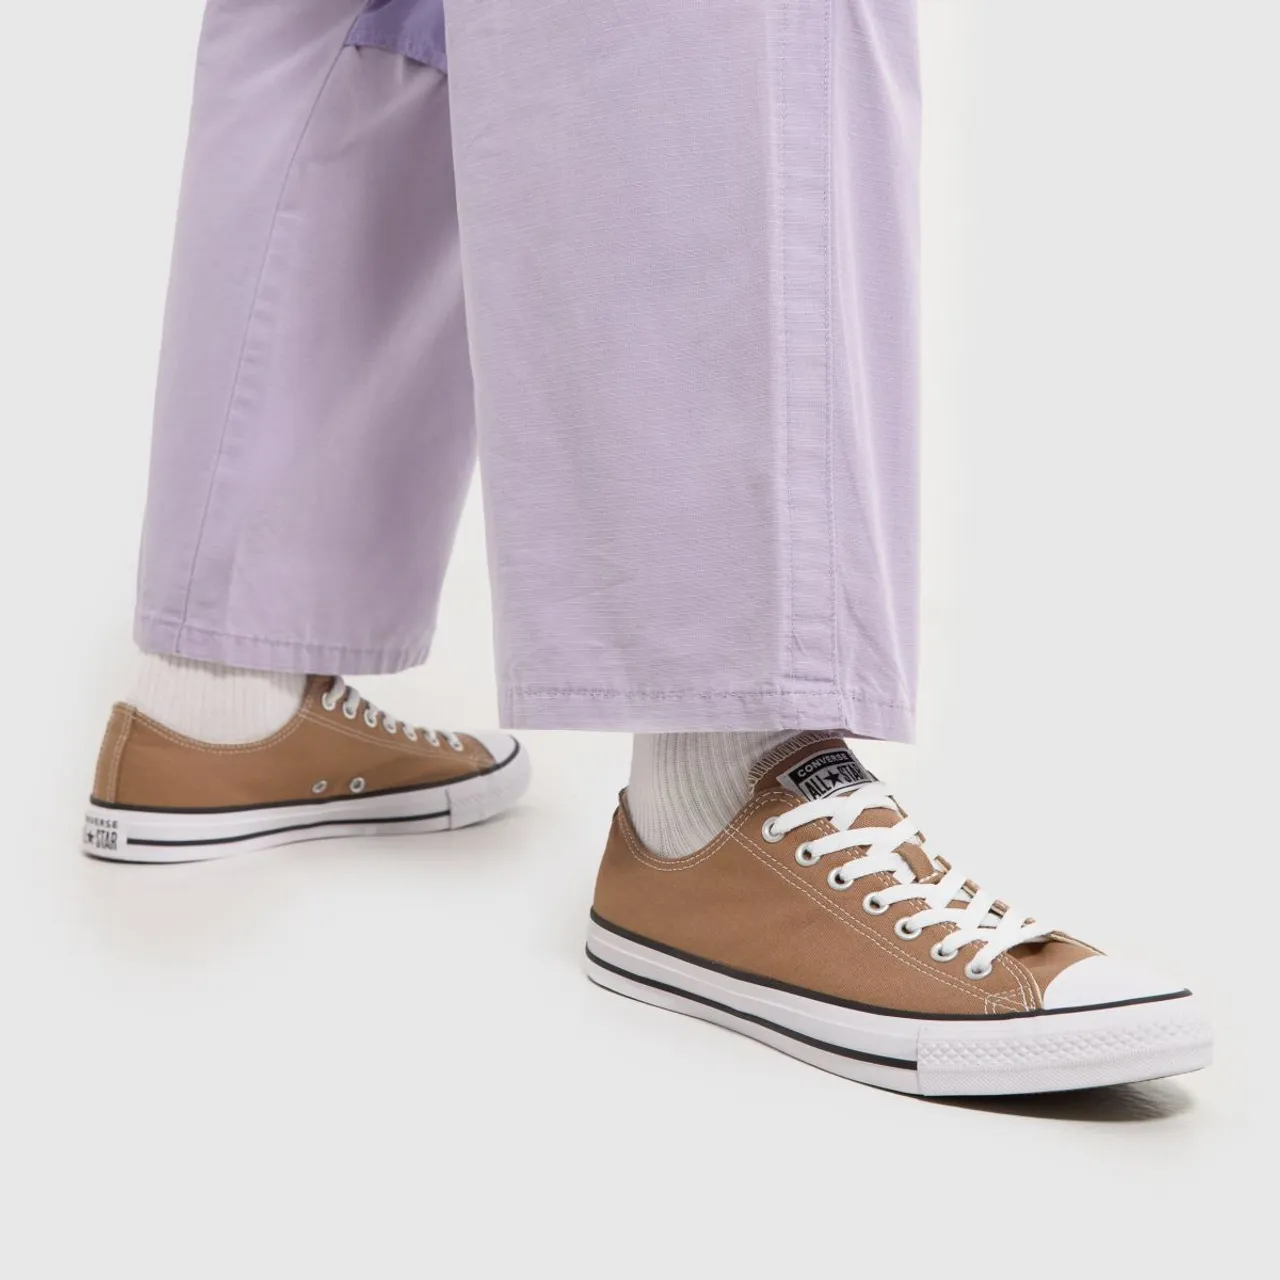 Converse all Star ox Trainers in Tan